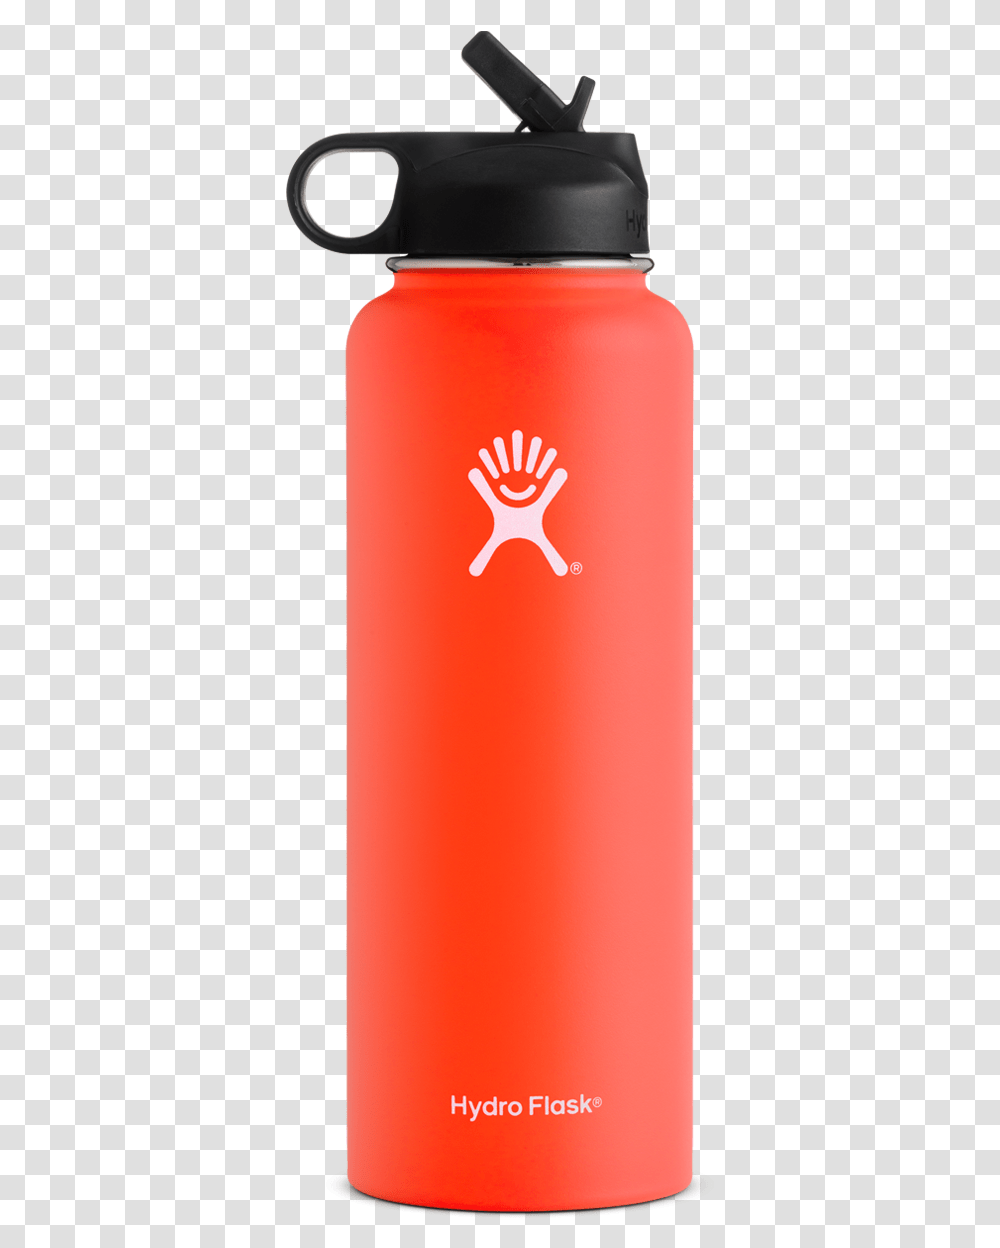 Red Hydro Flask With Straw, Bottle, Beverage, Drink, Shaker Transparent Png